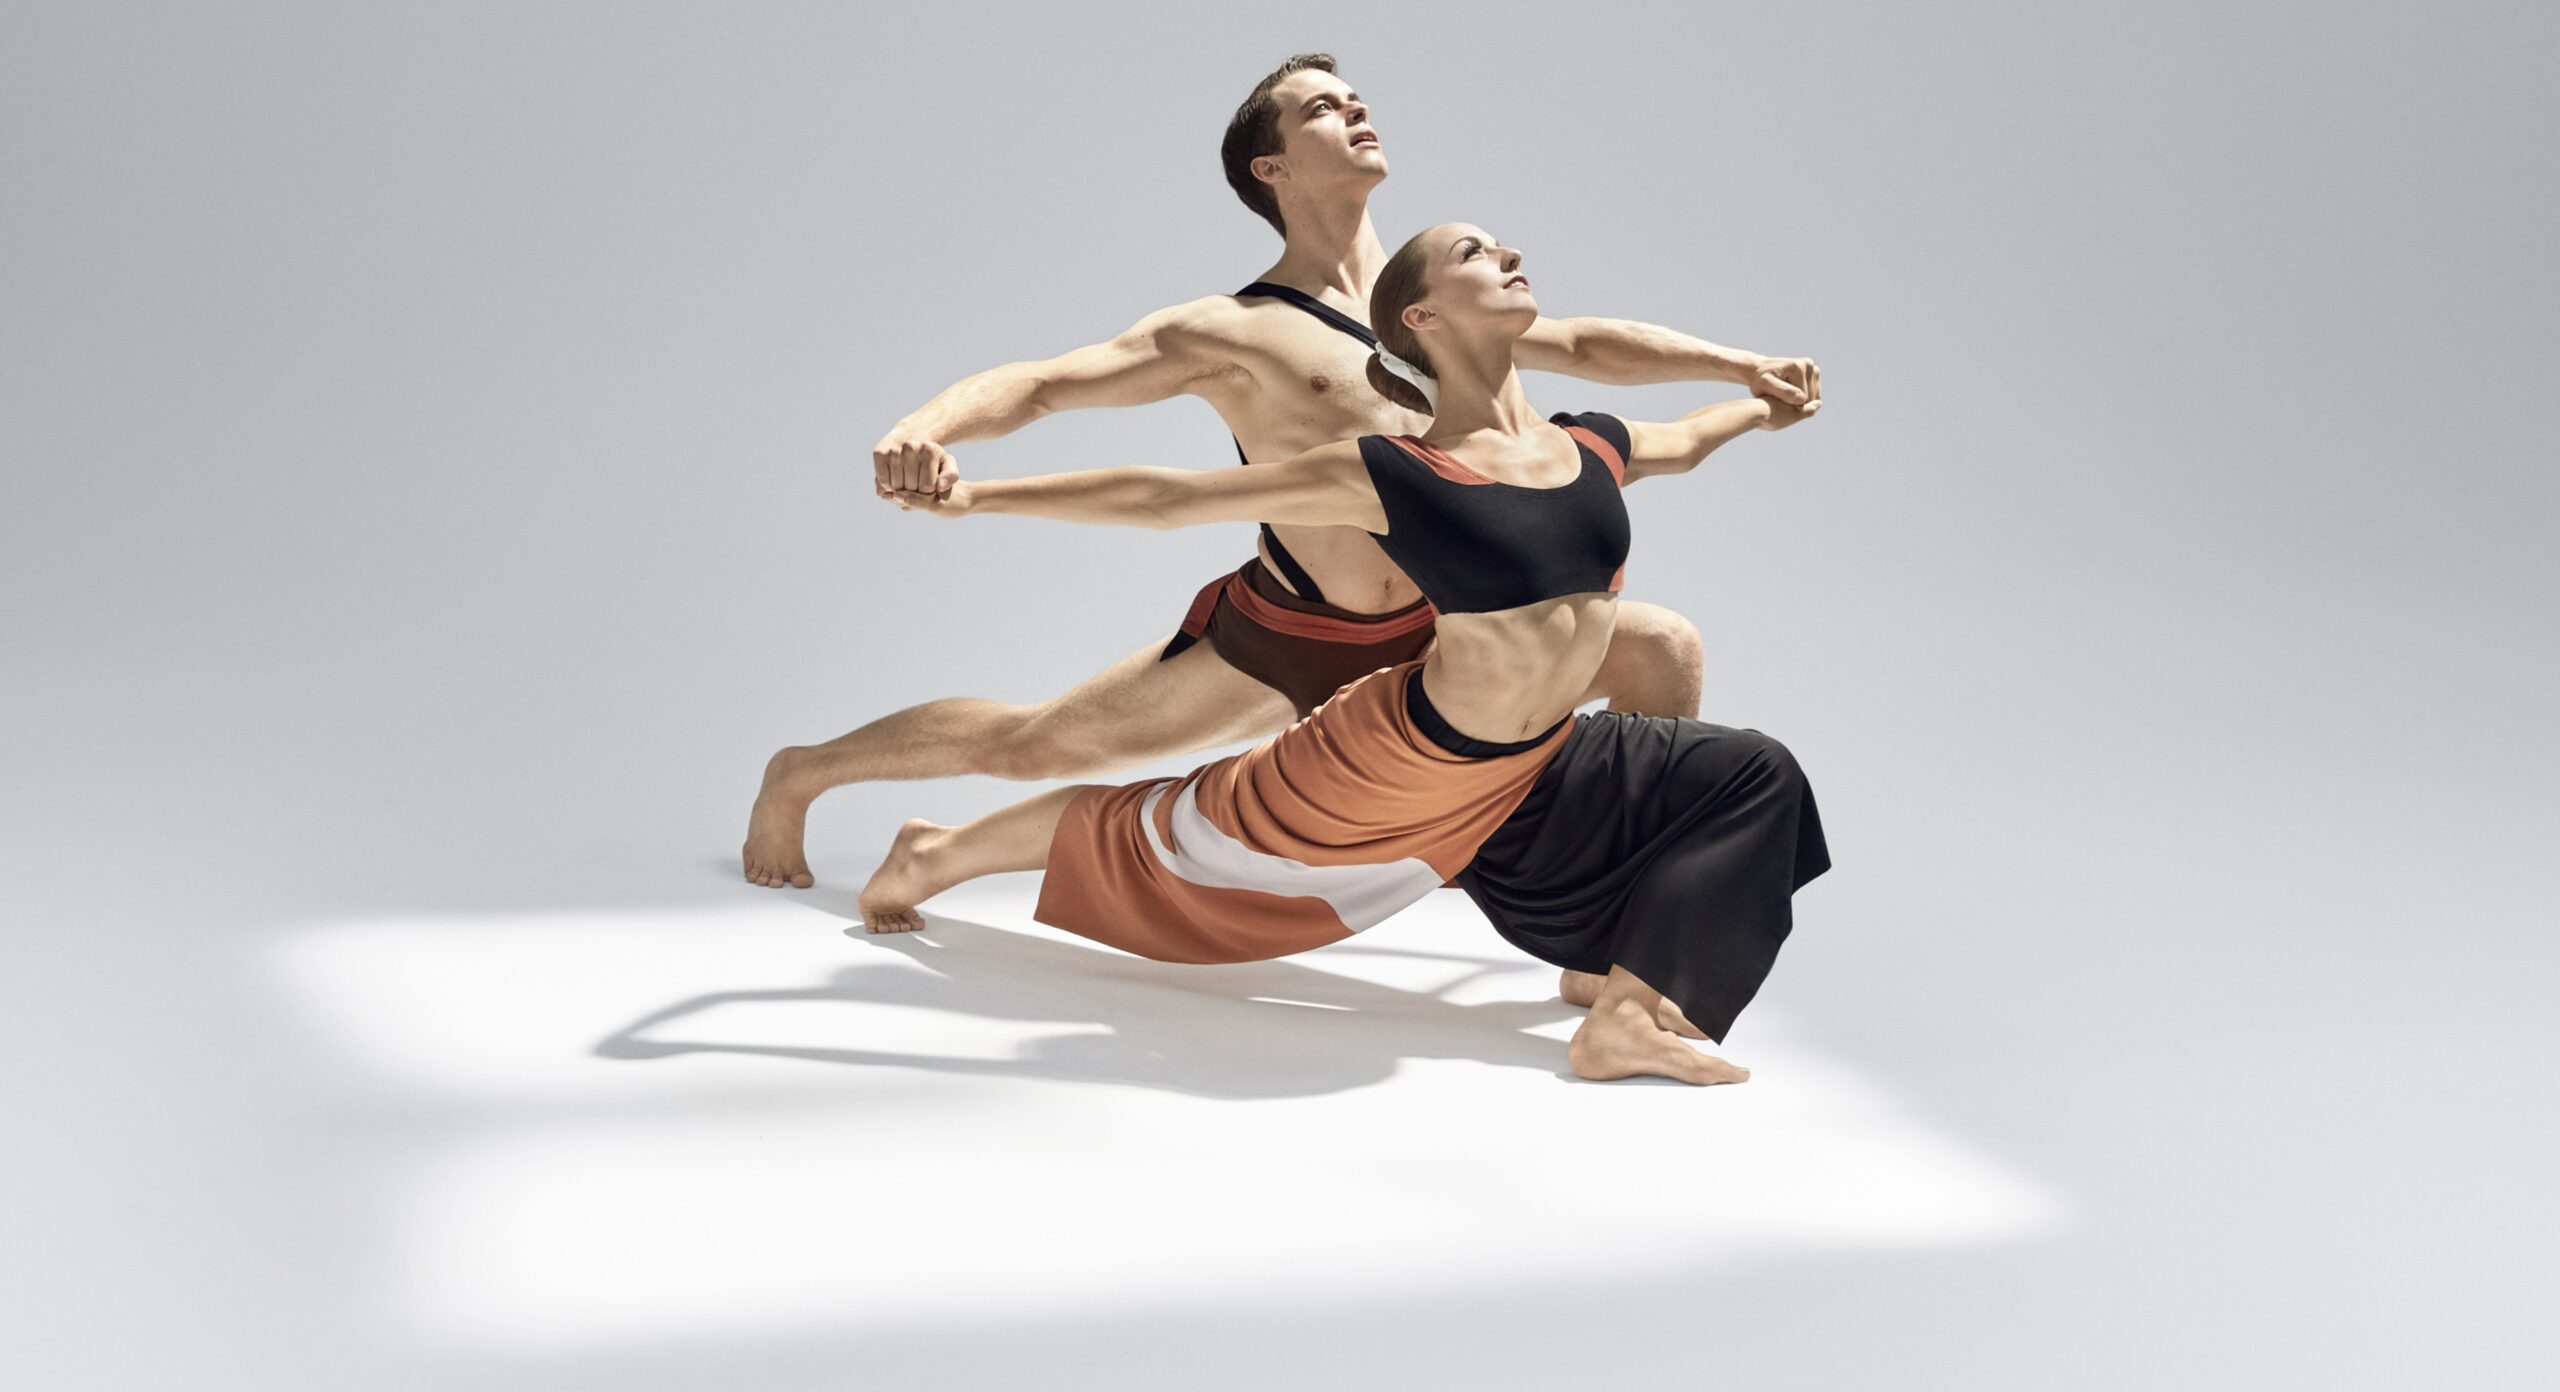 Two dancers from the Dark Meadow Suite dancing low in front of a white background.